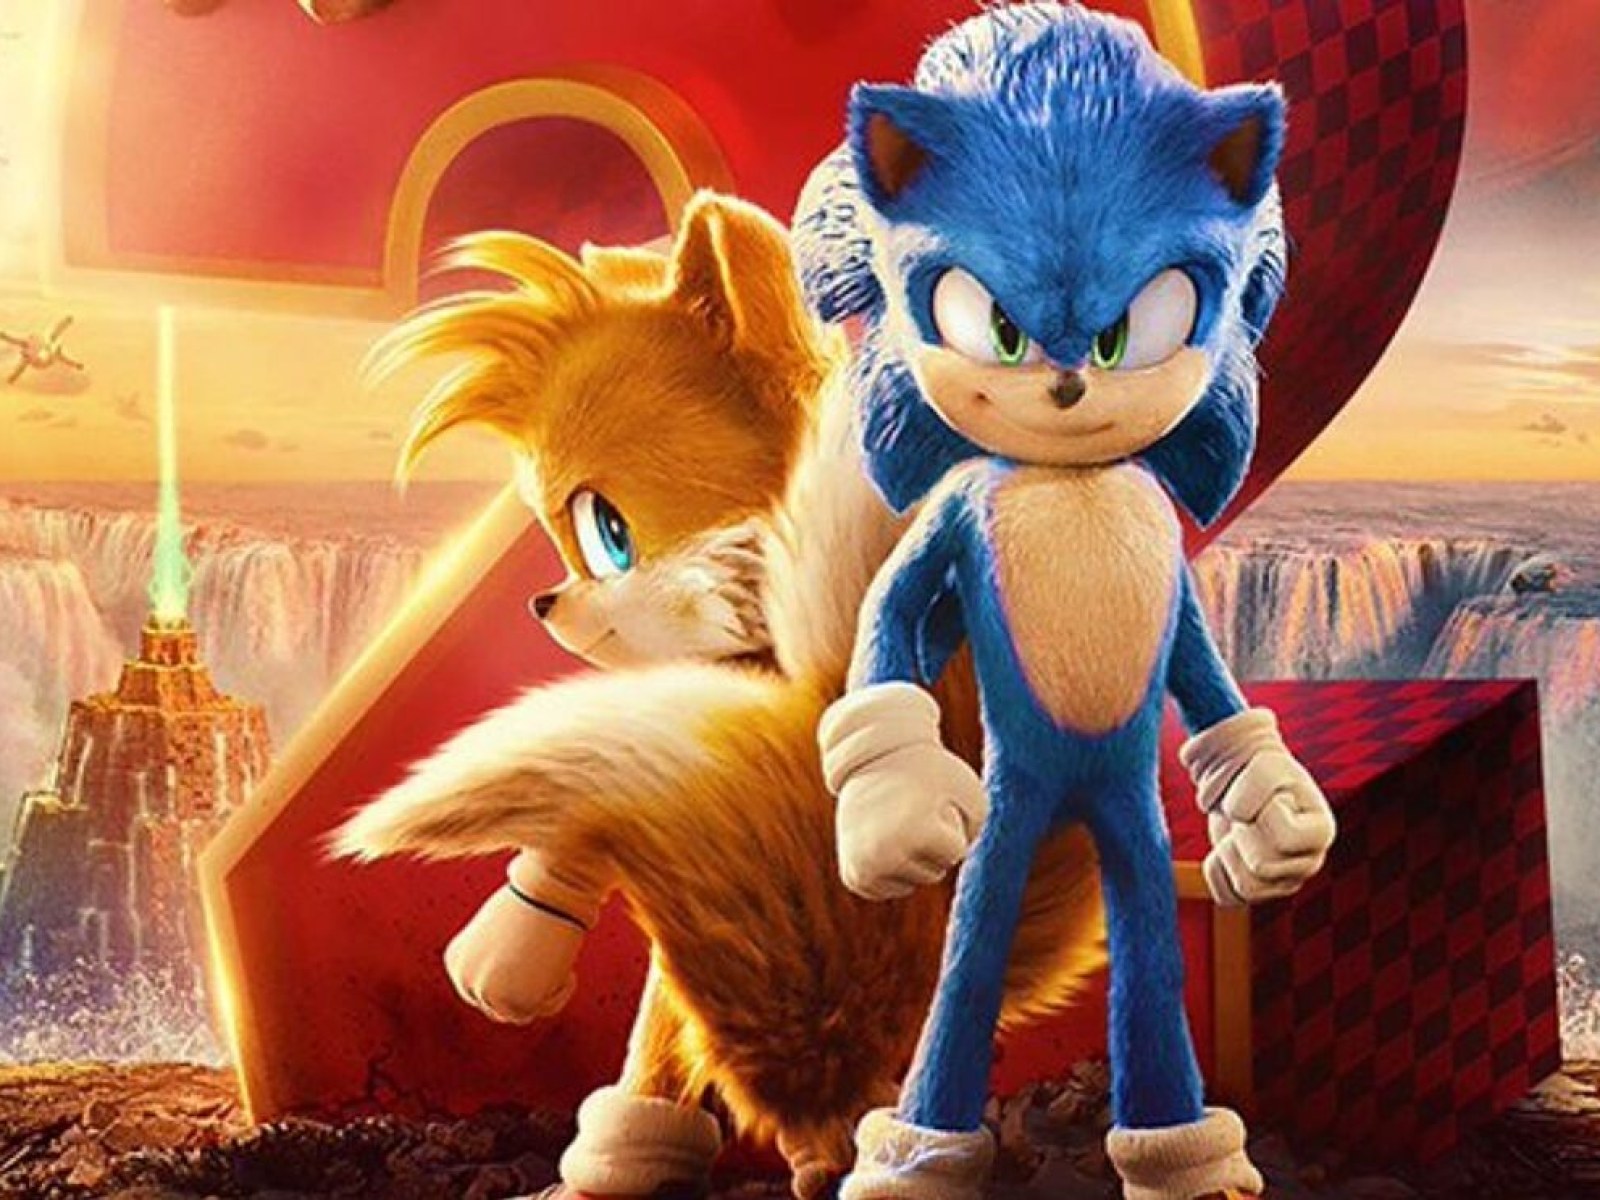 Sonic The Hedgehog 2': The Cast, Release Date & More You Need To